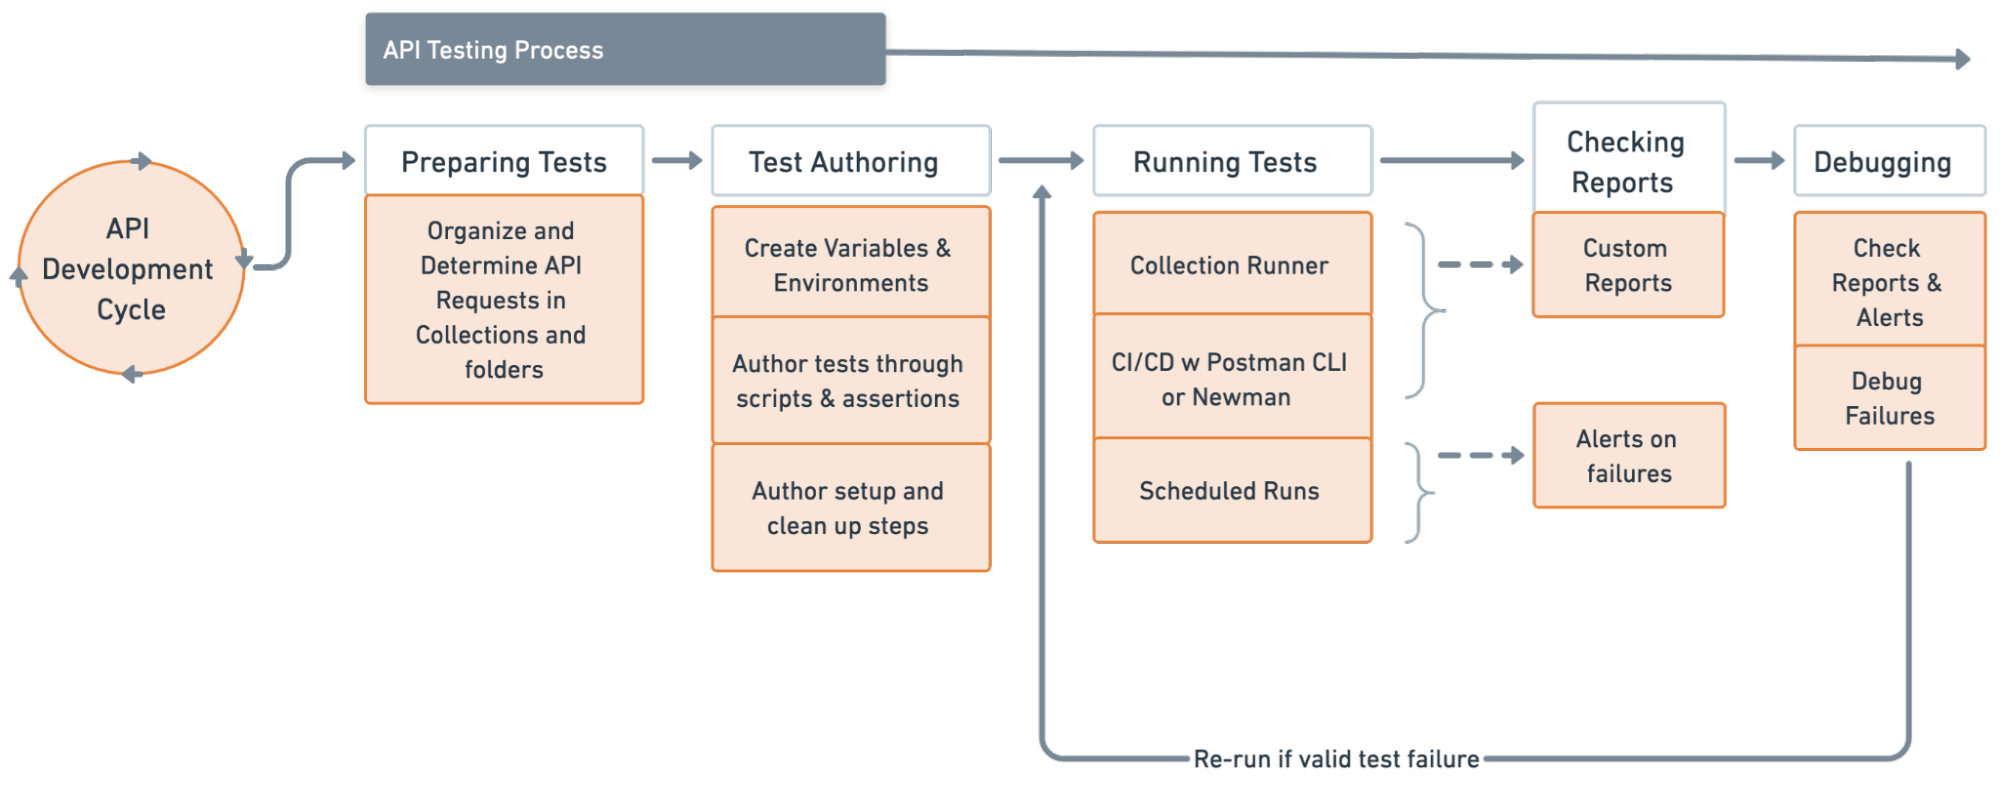 Detailed user journey for test automation with Postman.